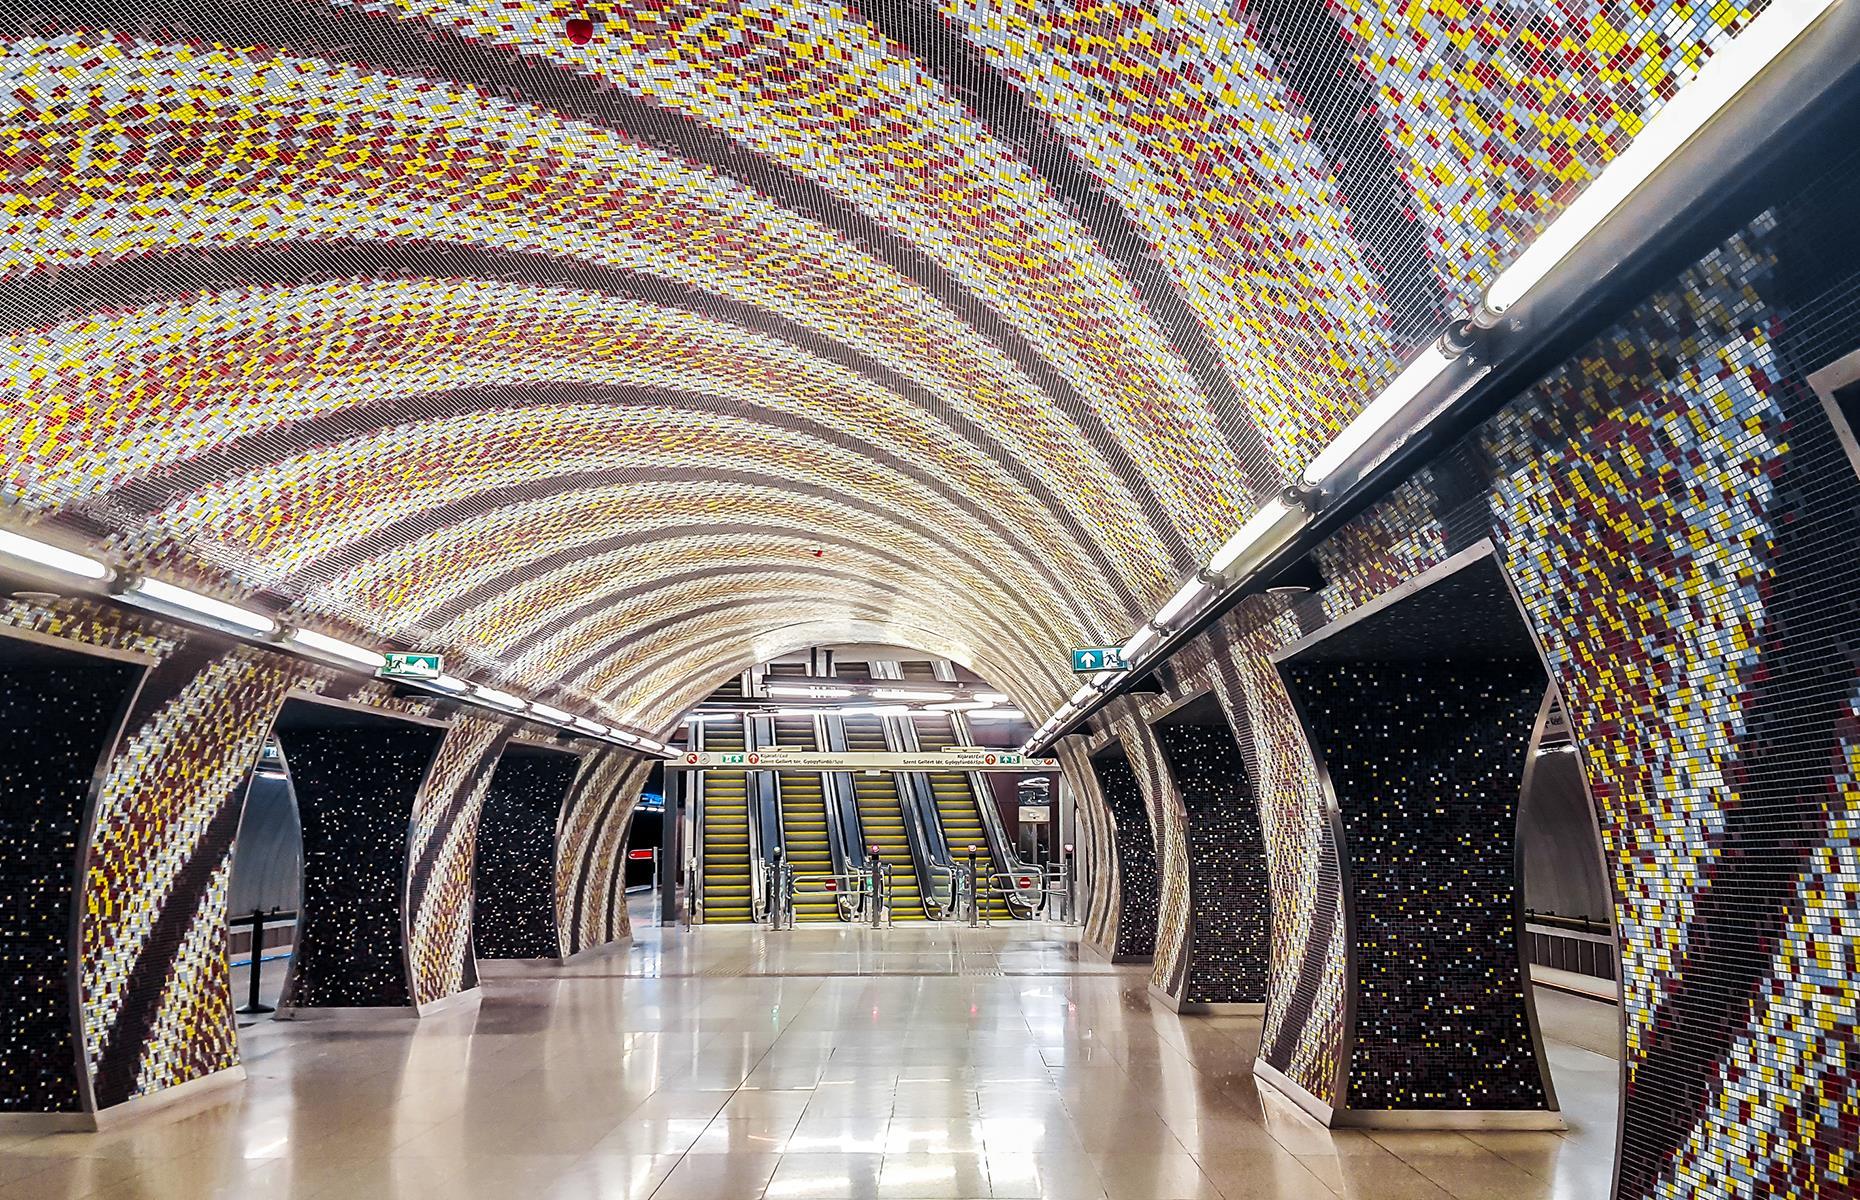 Built in honor of the 1998 World Expo, this station still features art installations by four Portuguese artists. Its combination of bright, bold and in-your-face colors and Brutalist architecture is really rather unusual.